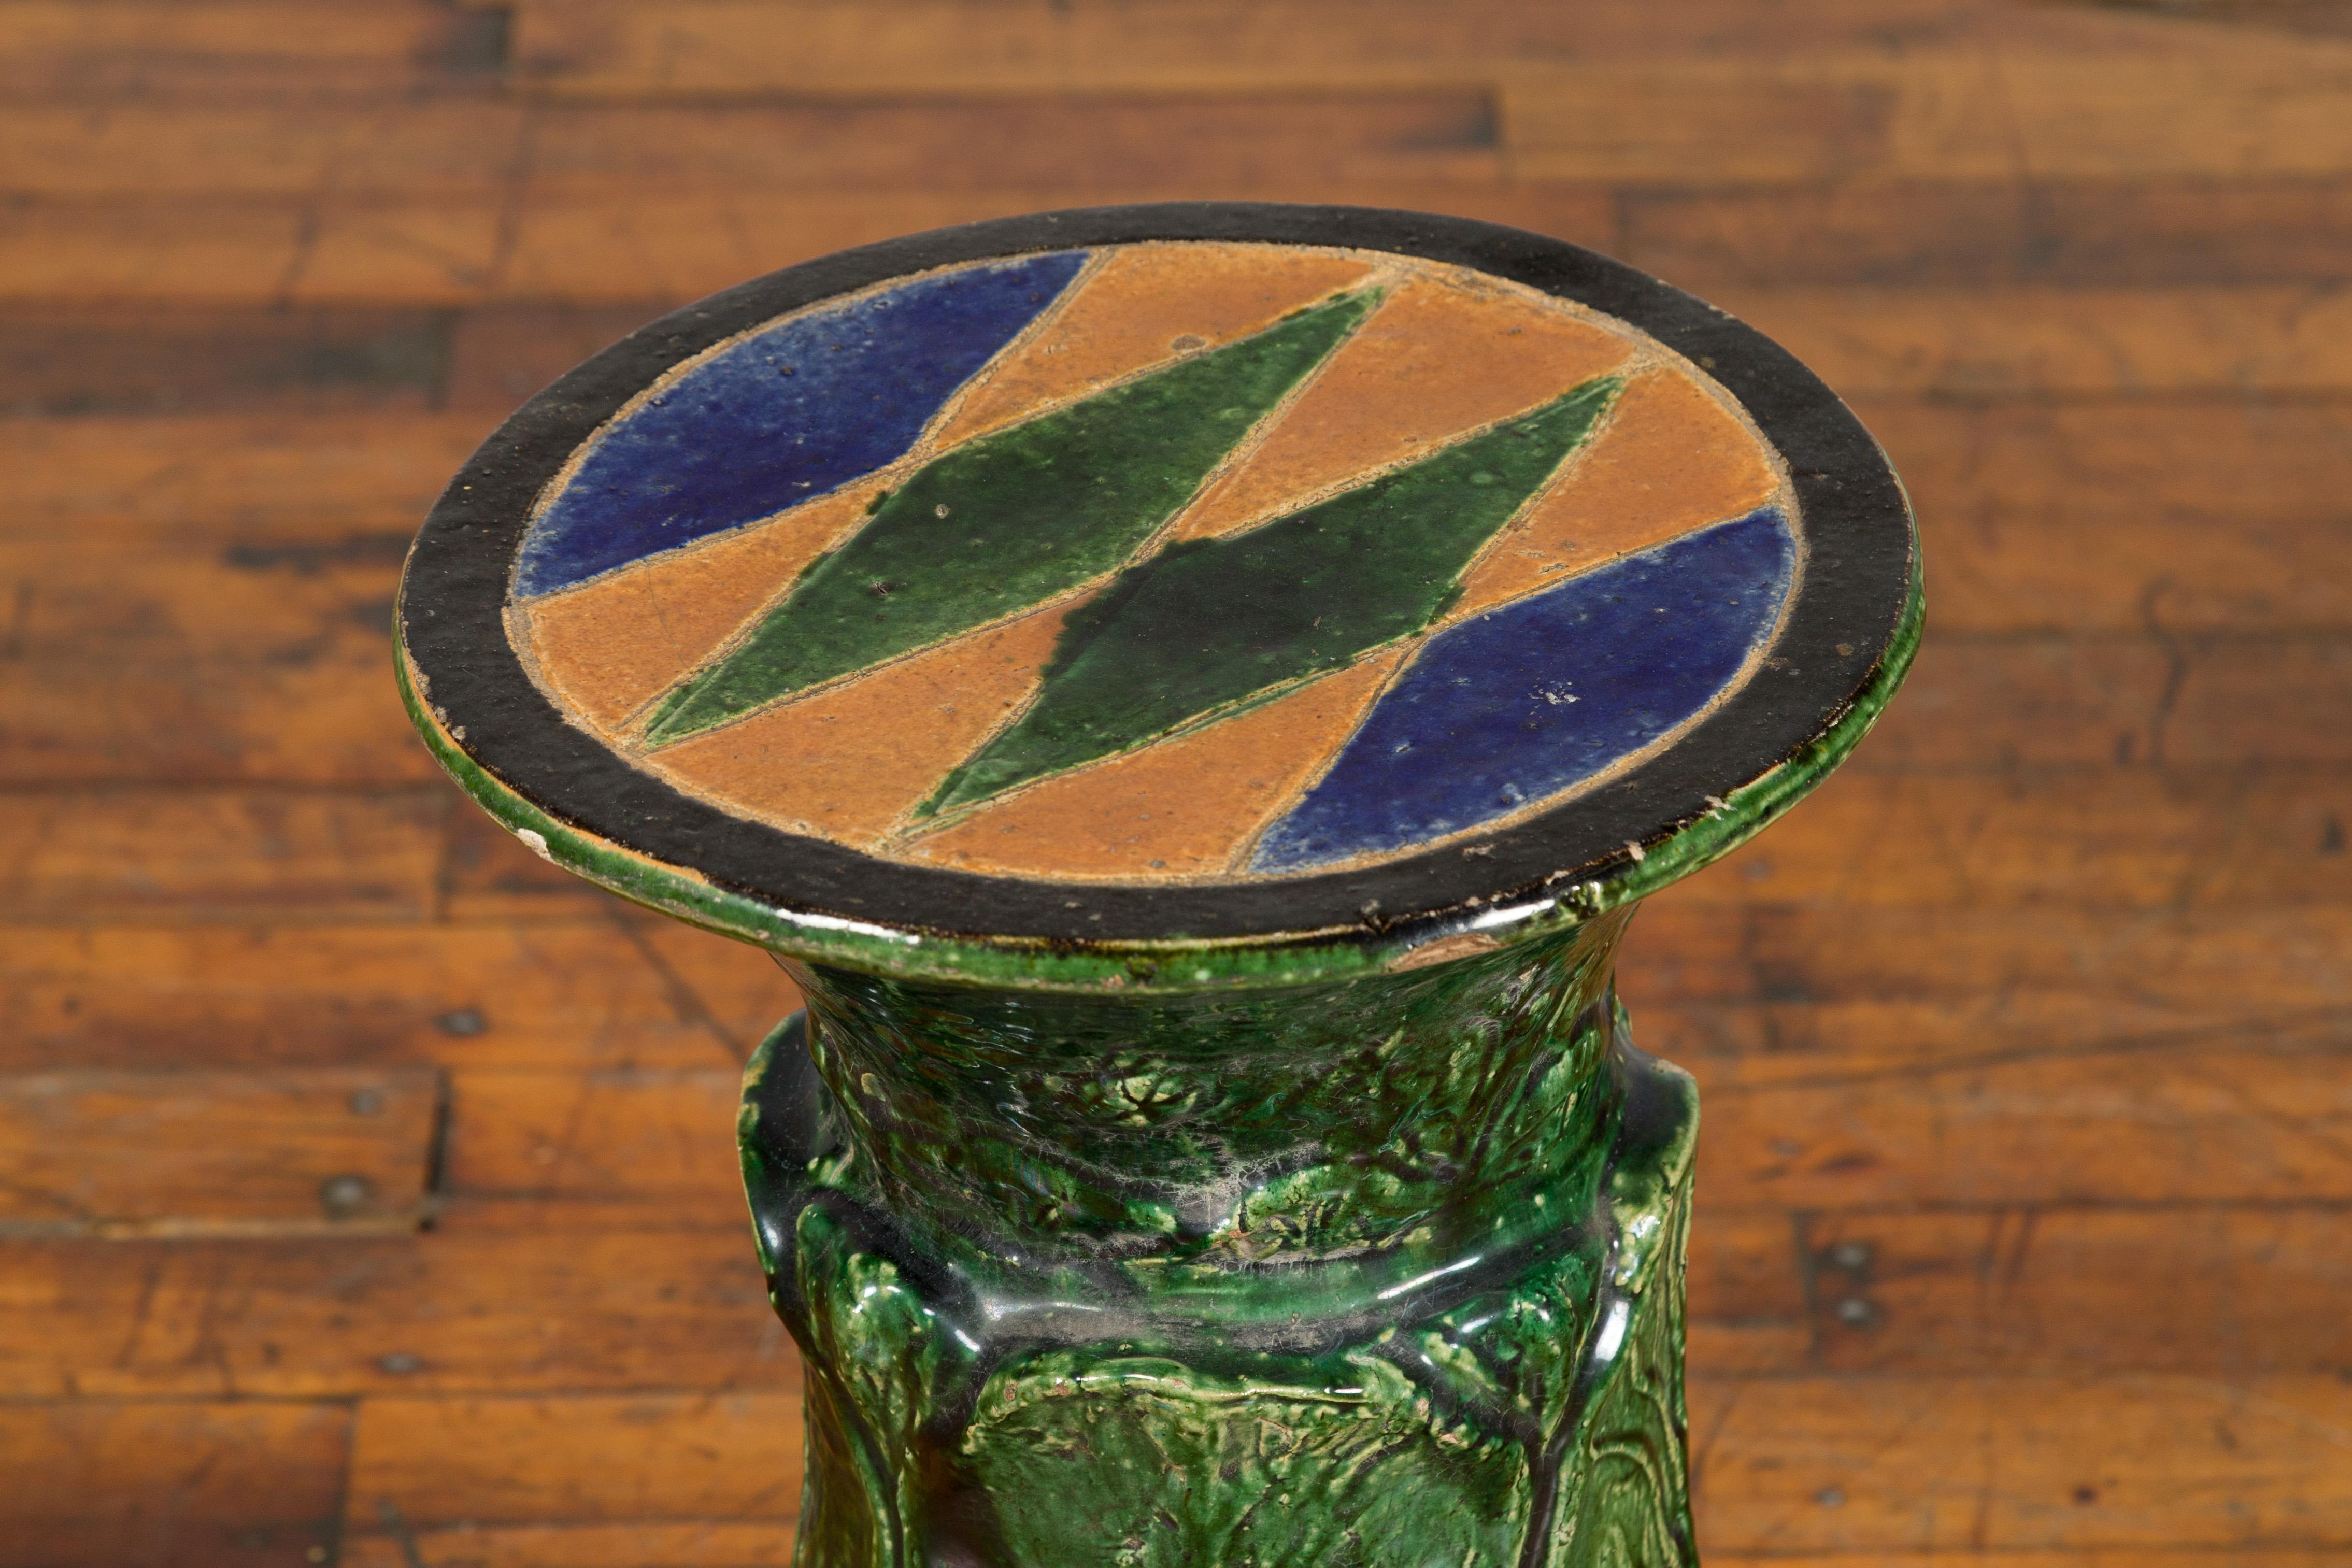 Antique Vietnamese Green Glazed Pedestal with Foliage Design and Diamond Motifs In Good Condition For Sale In Yonkers, NY